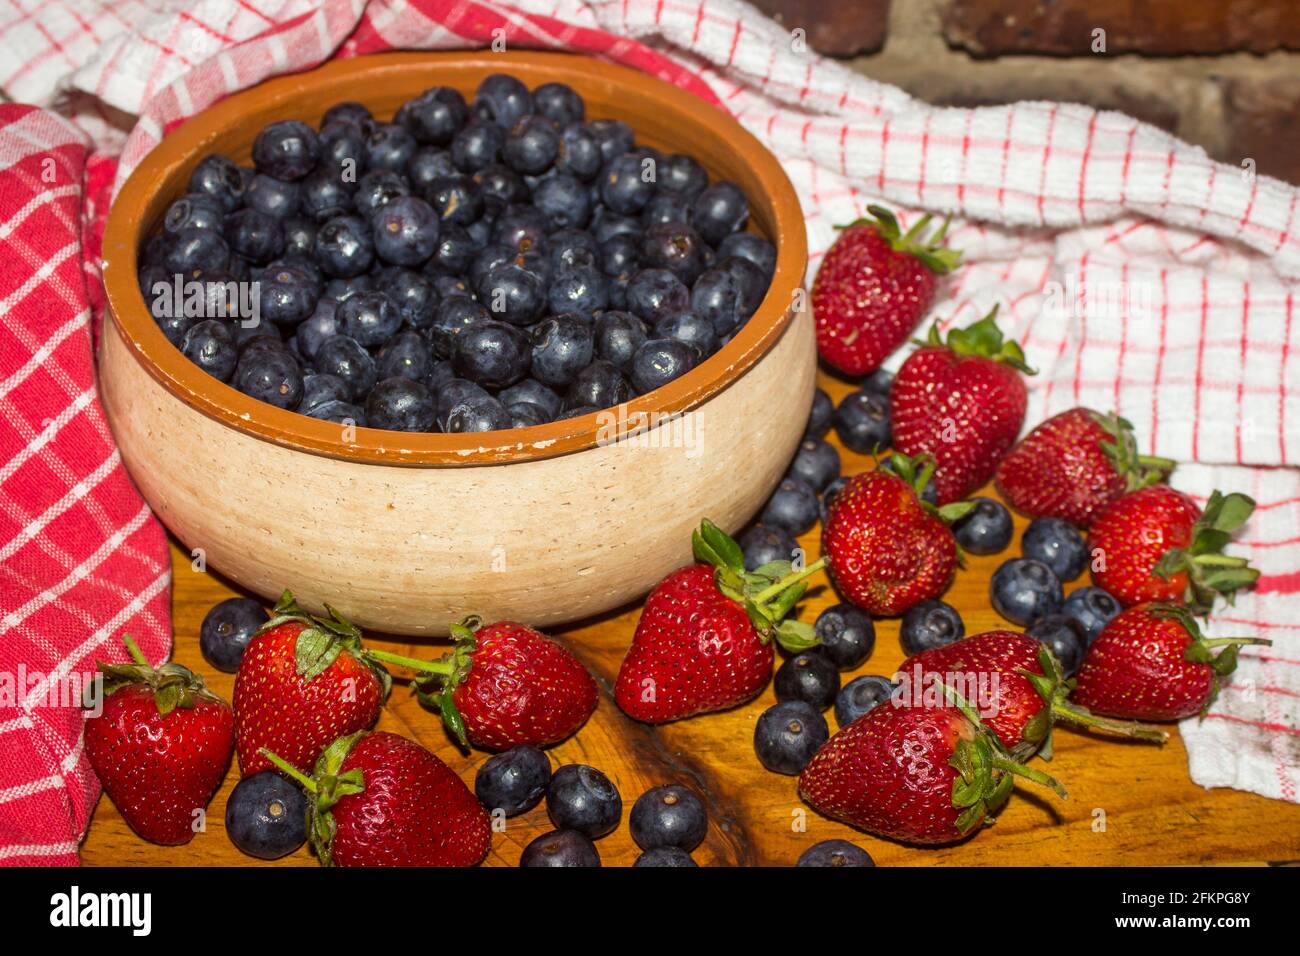 A rustic pottery bowl, filled with Indigo colored blueberries, and surrounded by more blueberries and strawberries Stock Photo